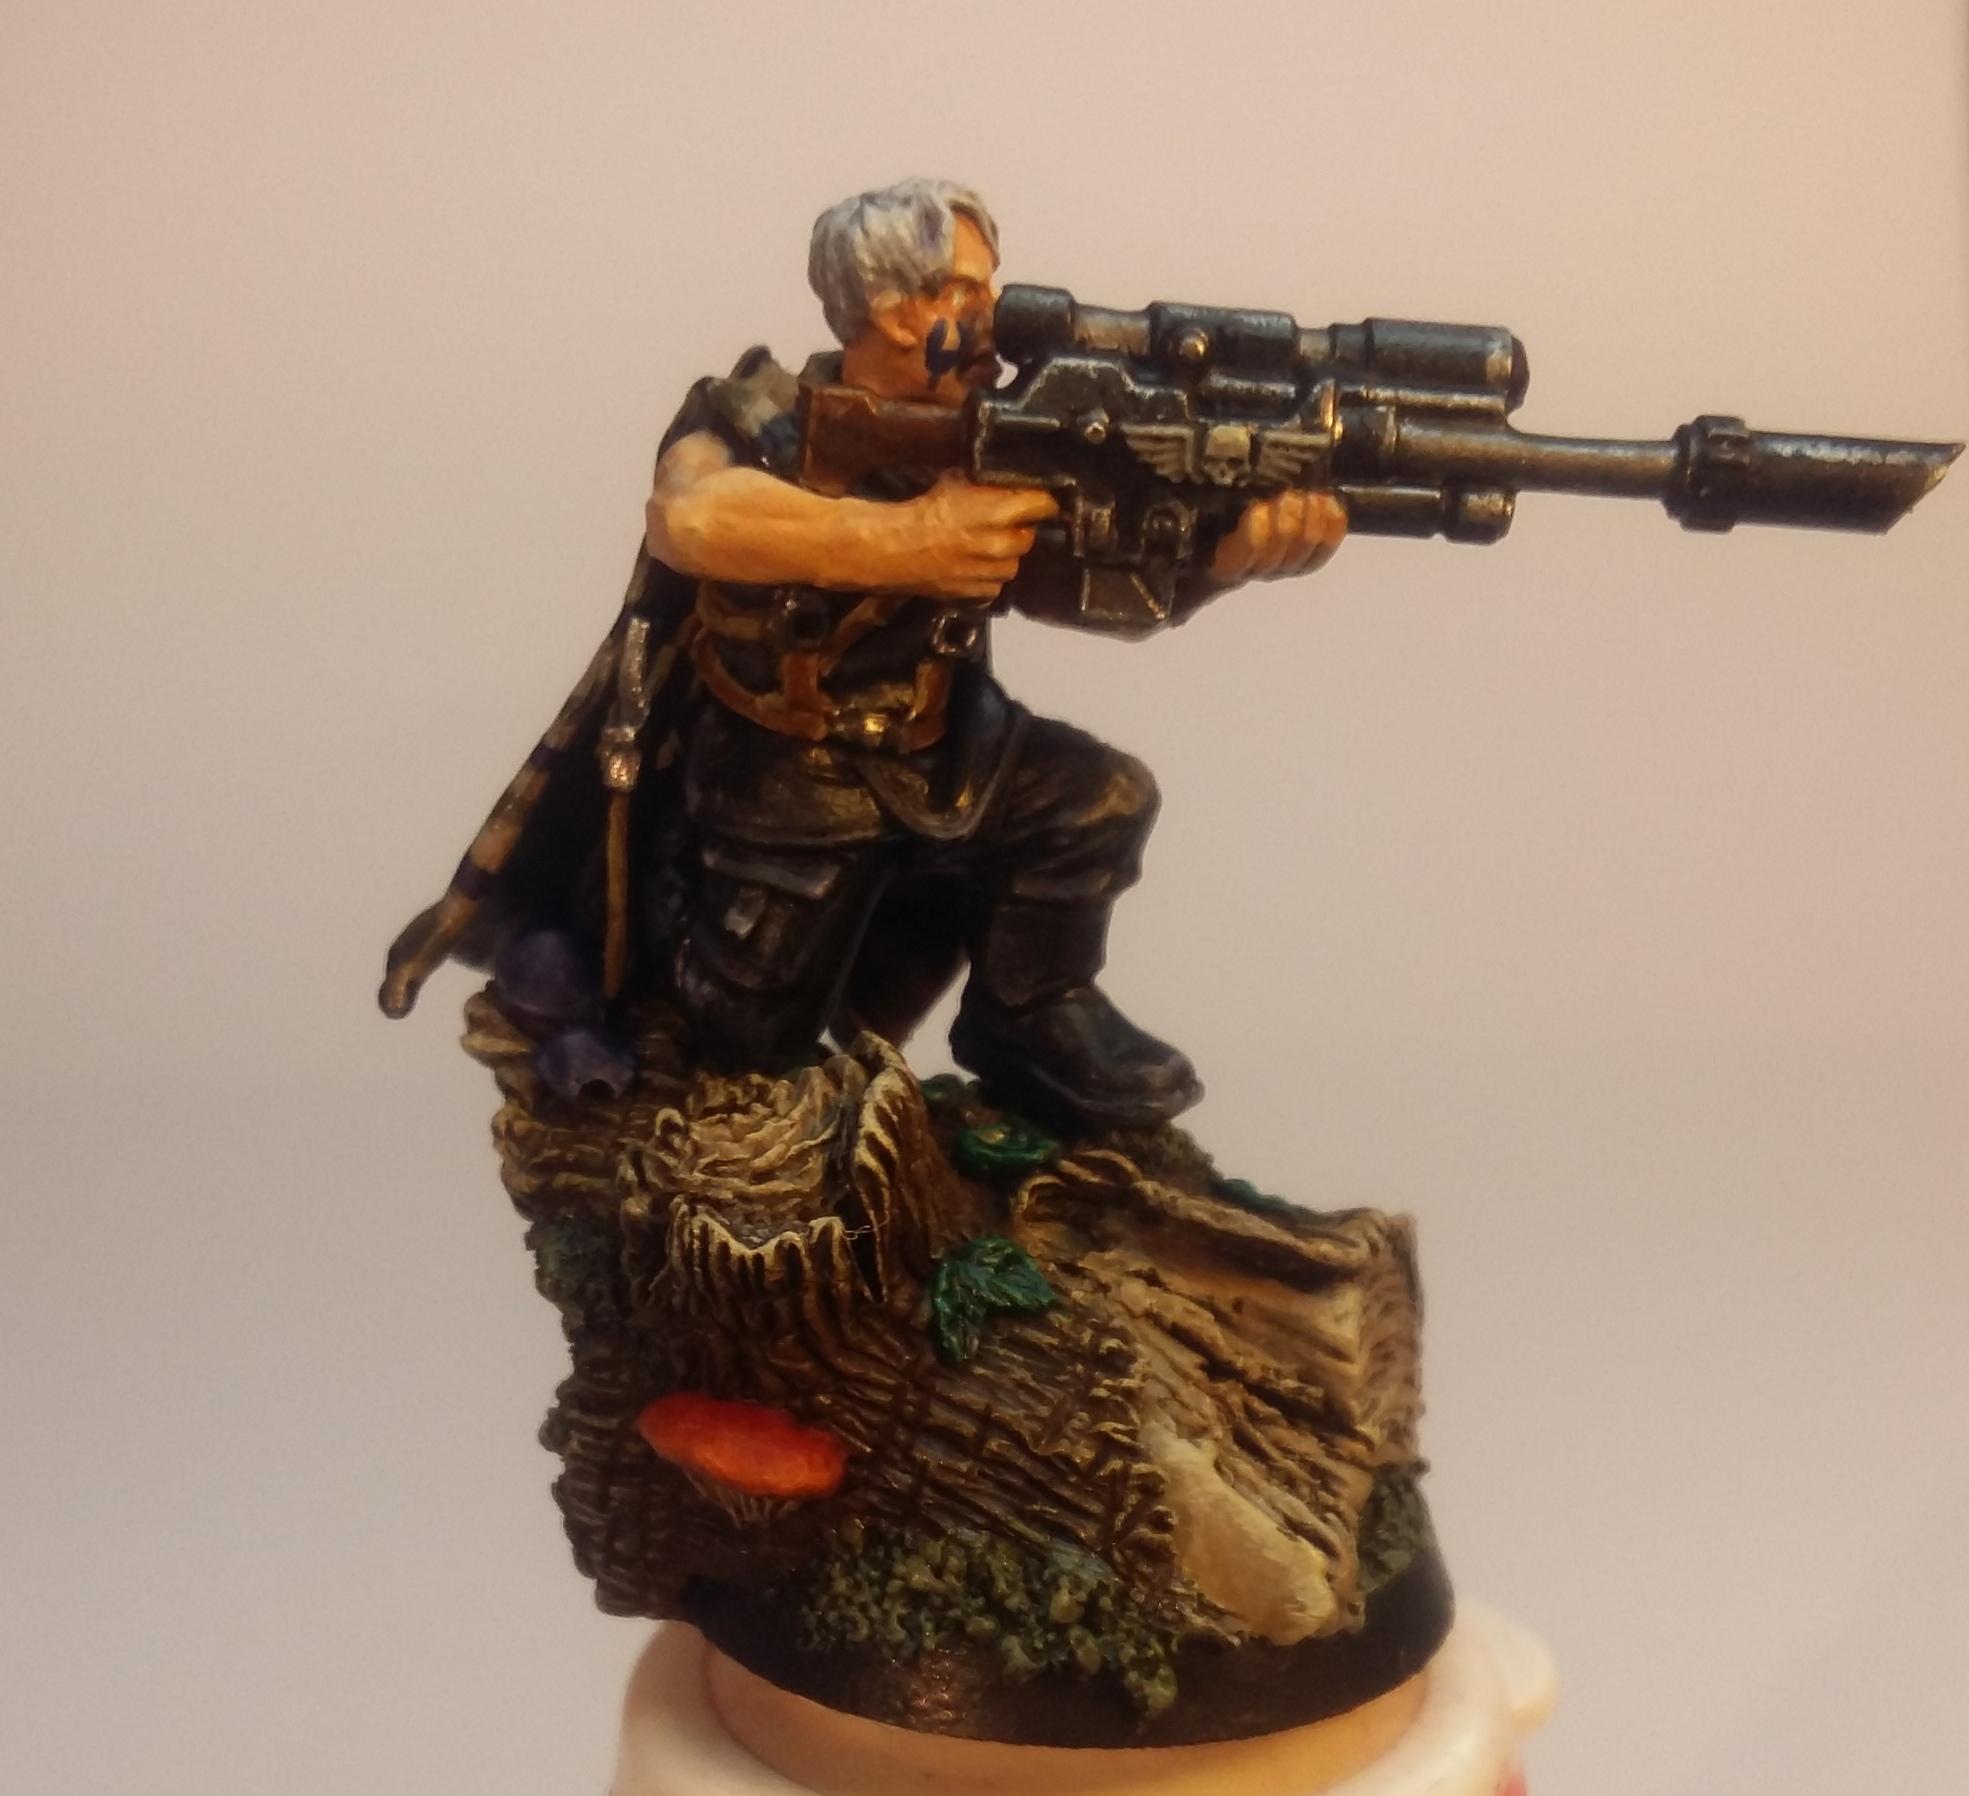 Snipers, Tanith, Tanith Sniper